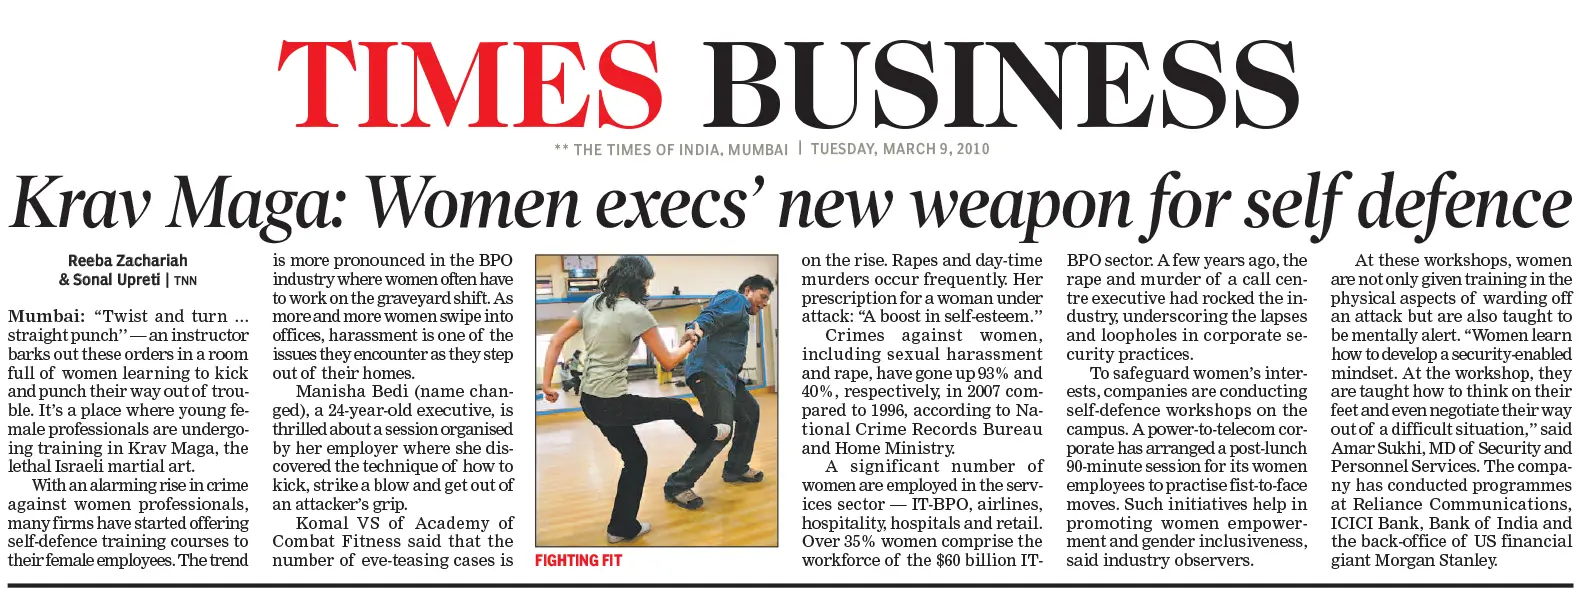 times of india krav maga women execs new weapon for self defence 2010 3 9 19